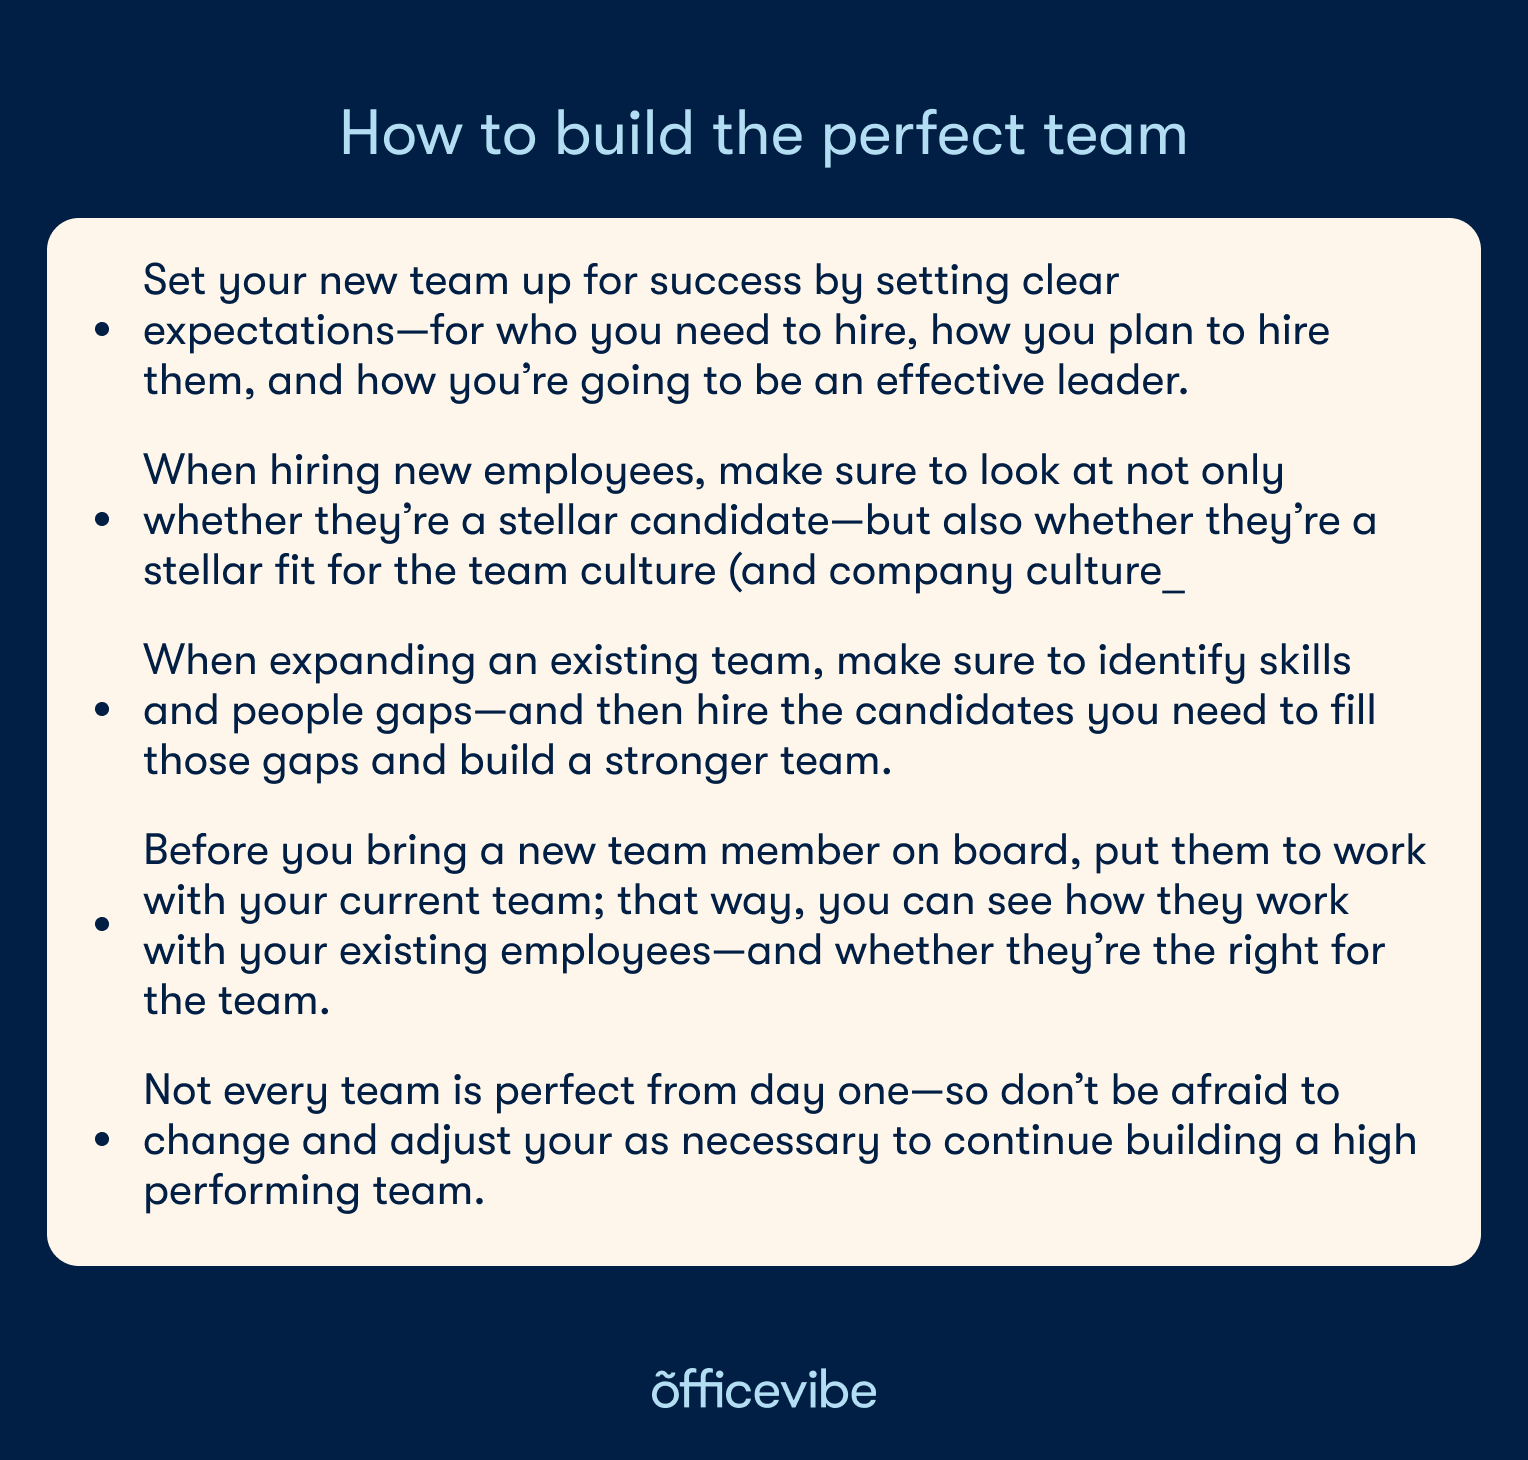 Tips on how to build the perfect team.